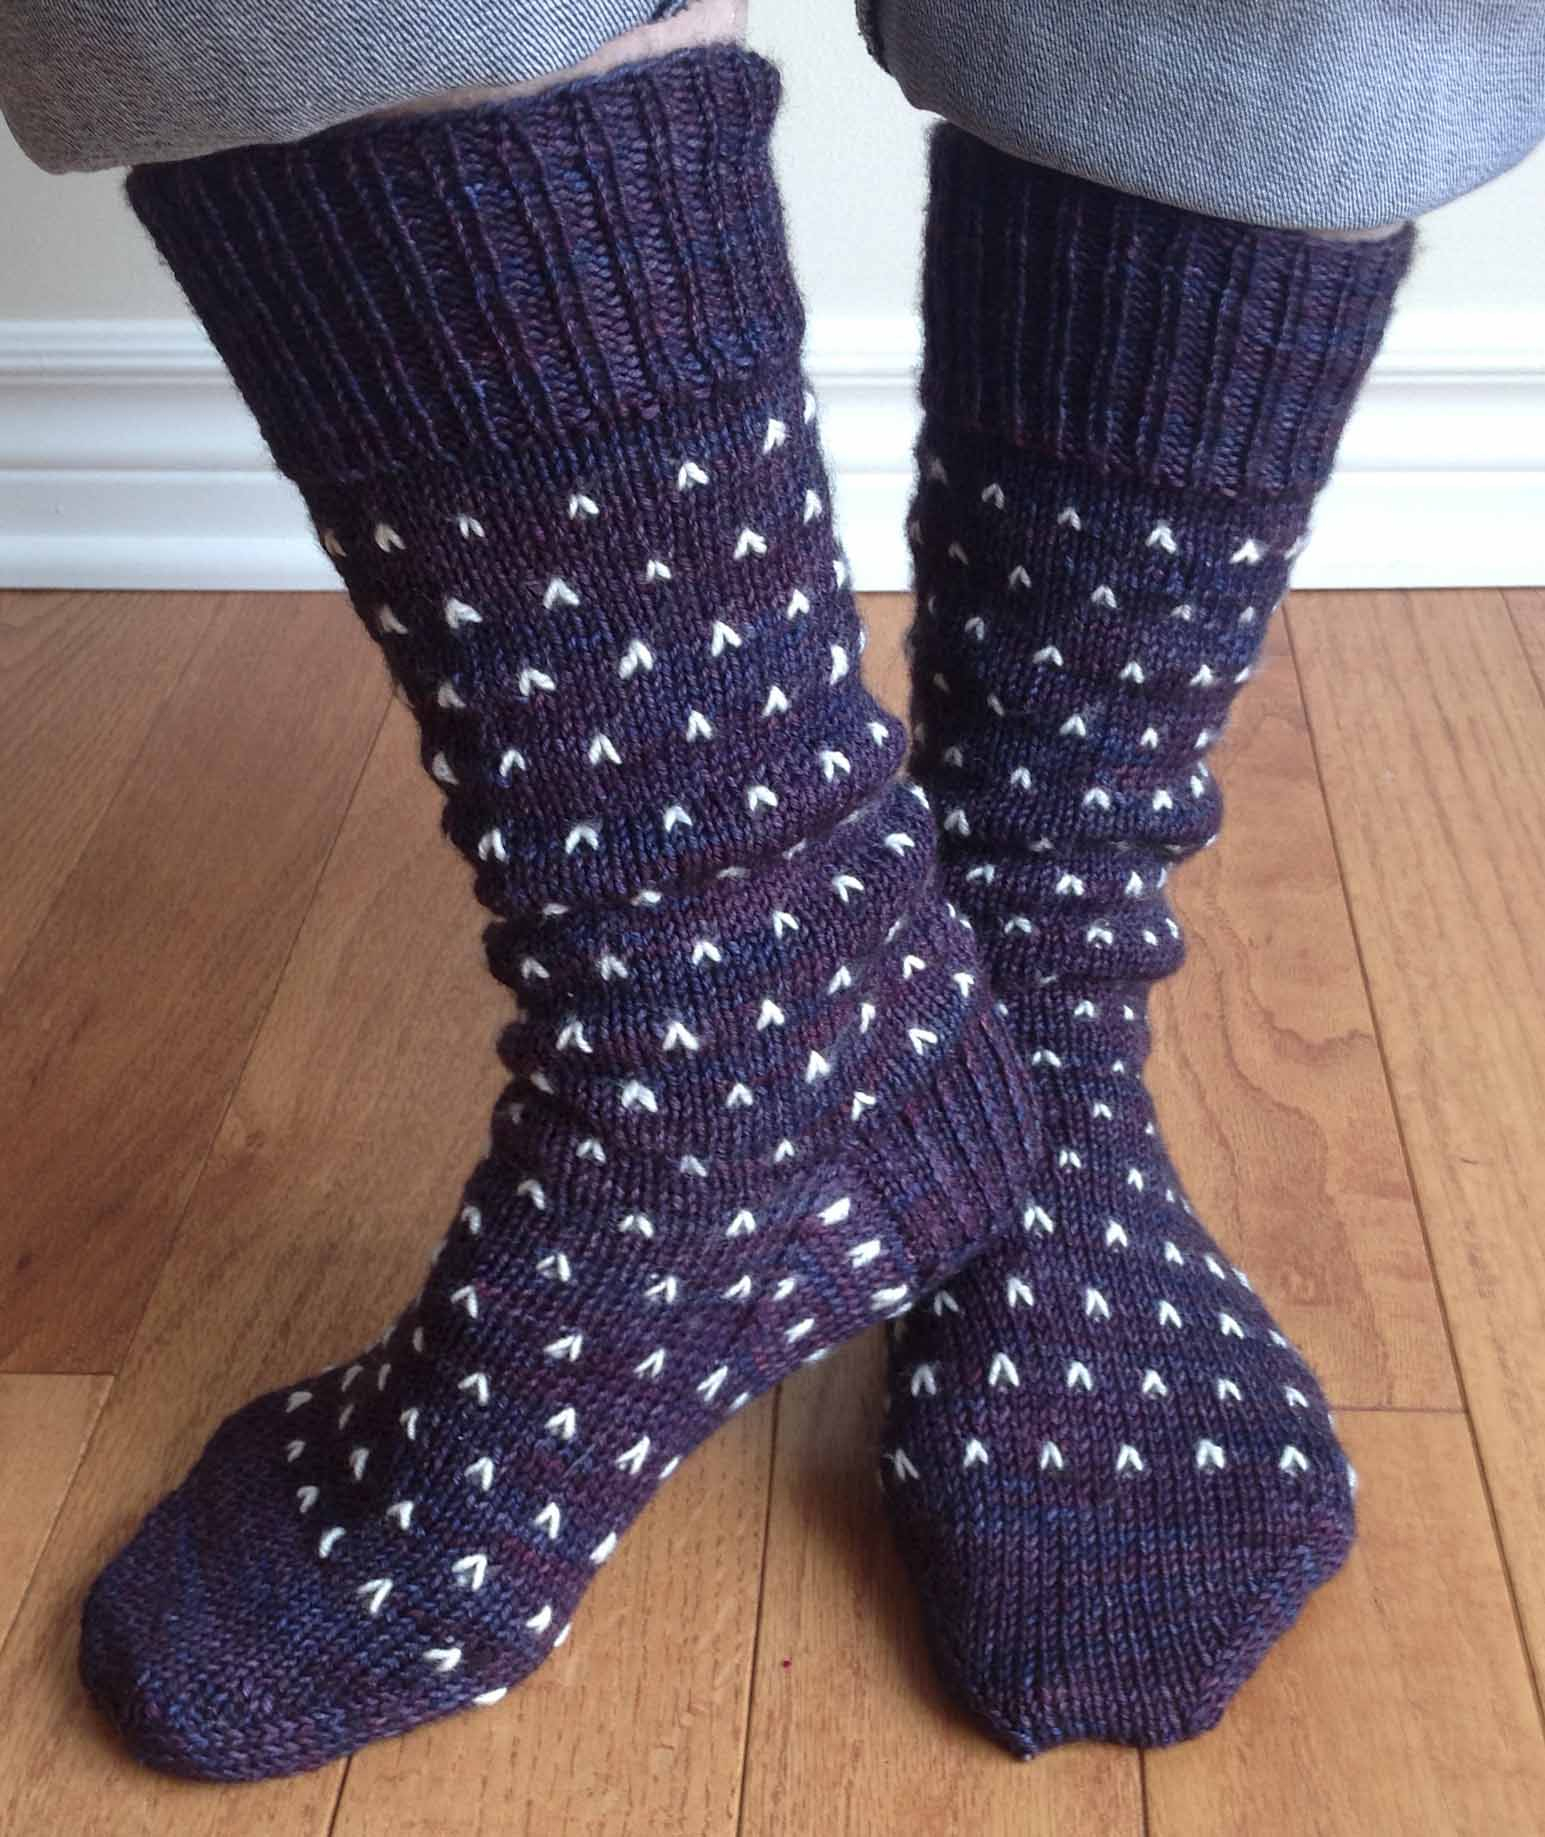 Free Knitting Patterns For Socks On Four Needles Free Knitting Patterns